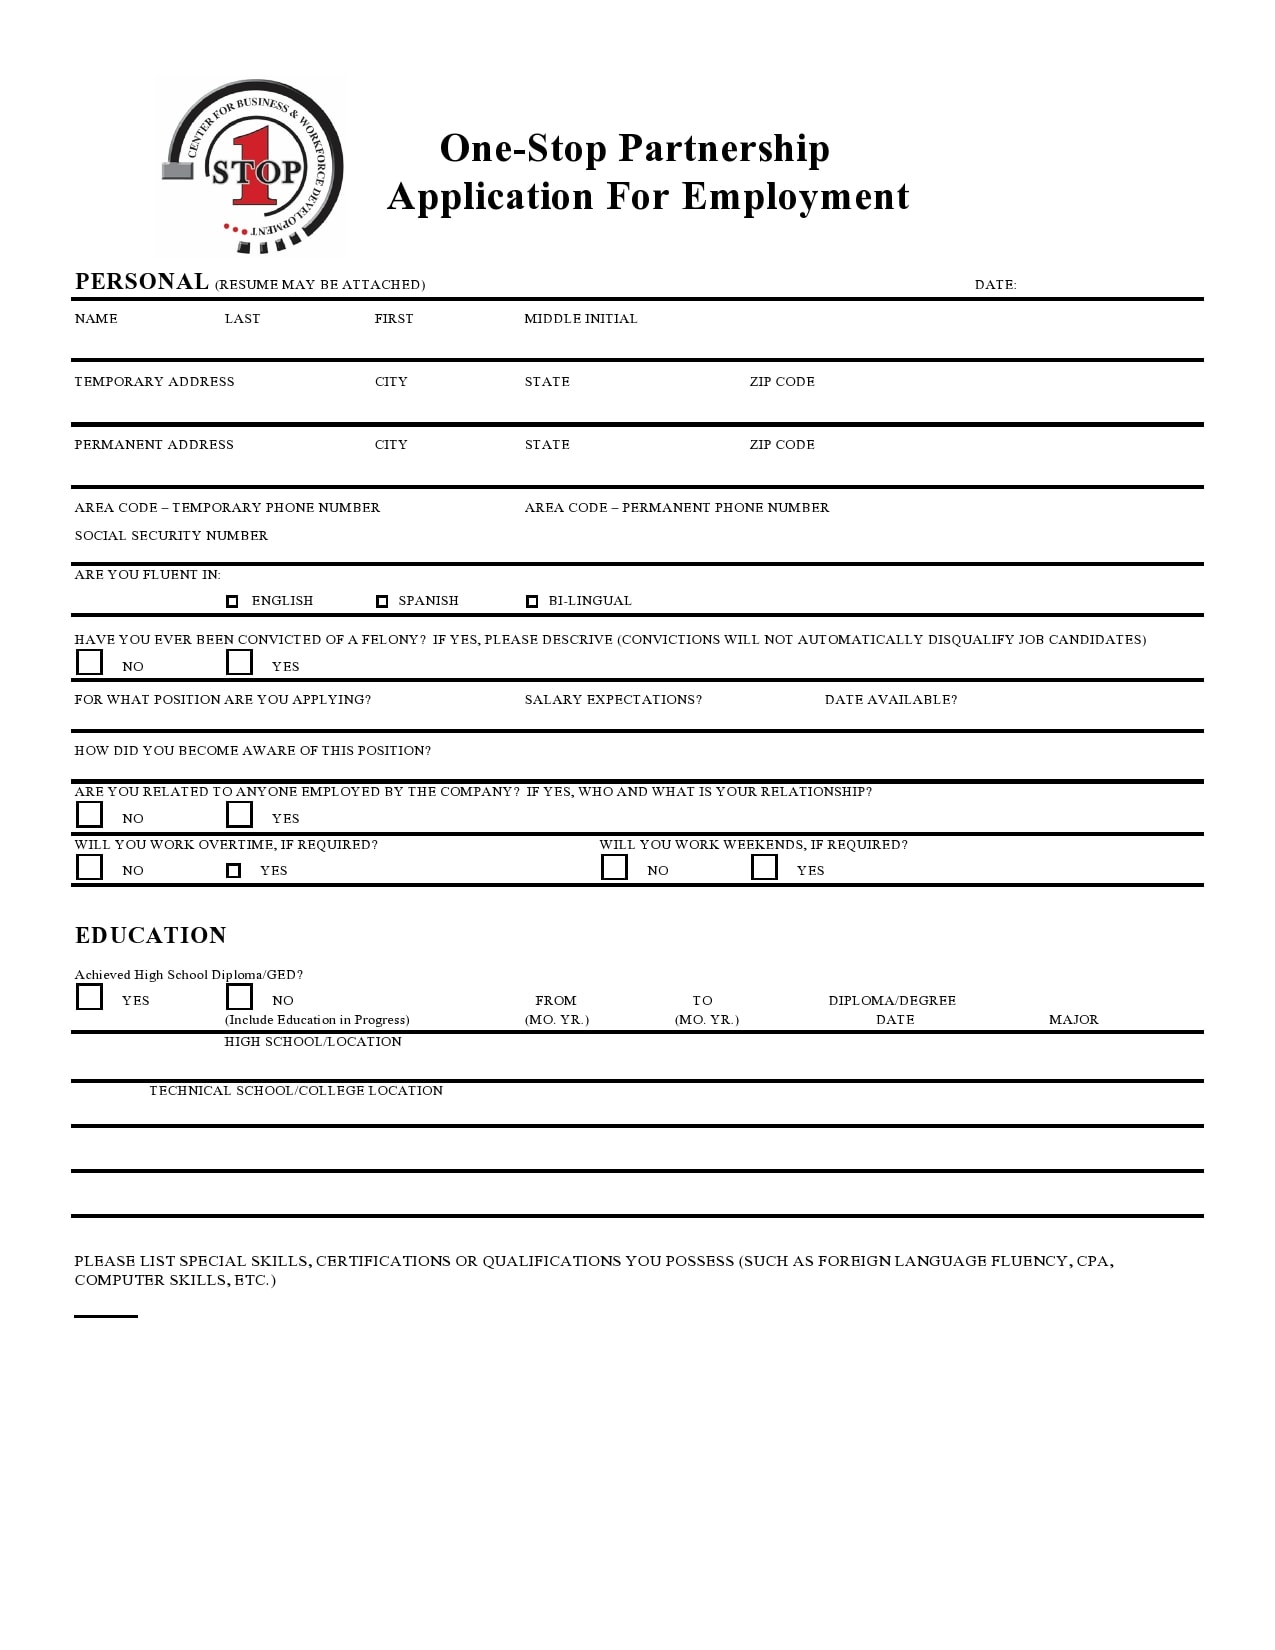 Basic Employment Application Template from templatearchive.com